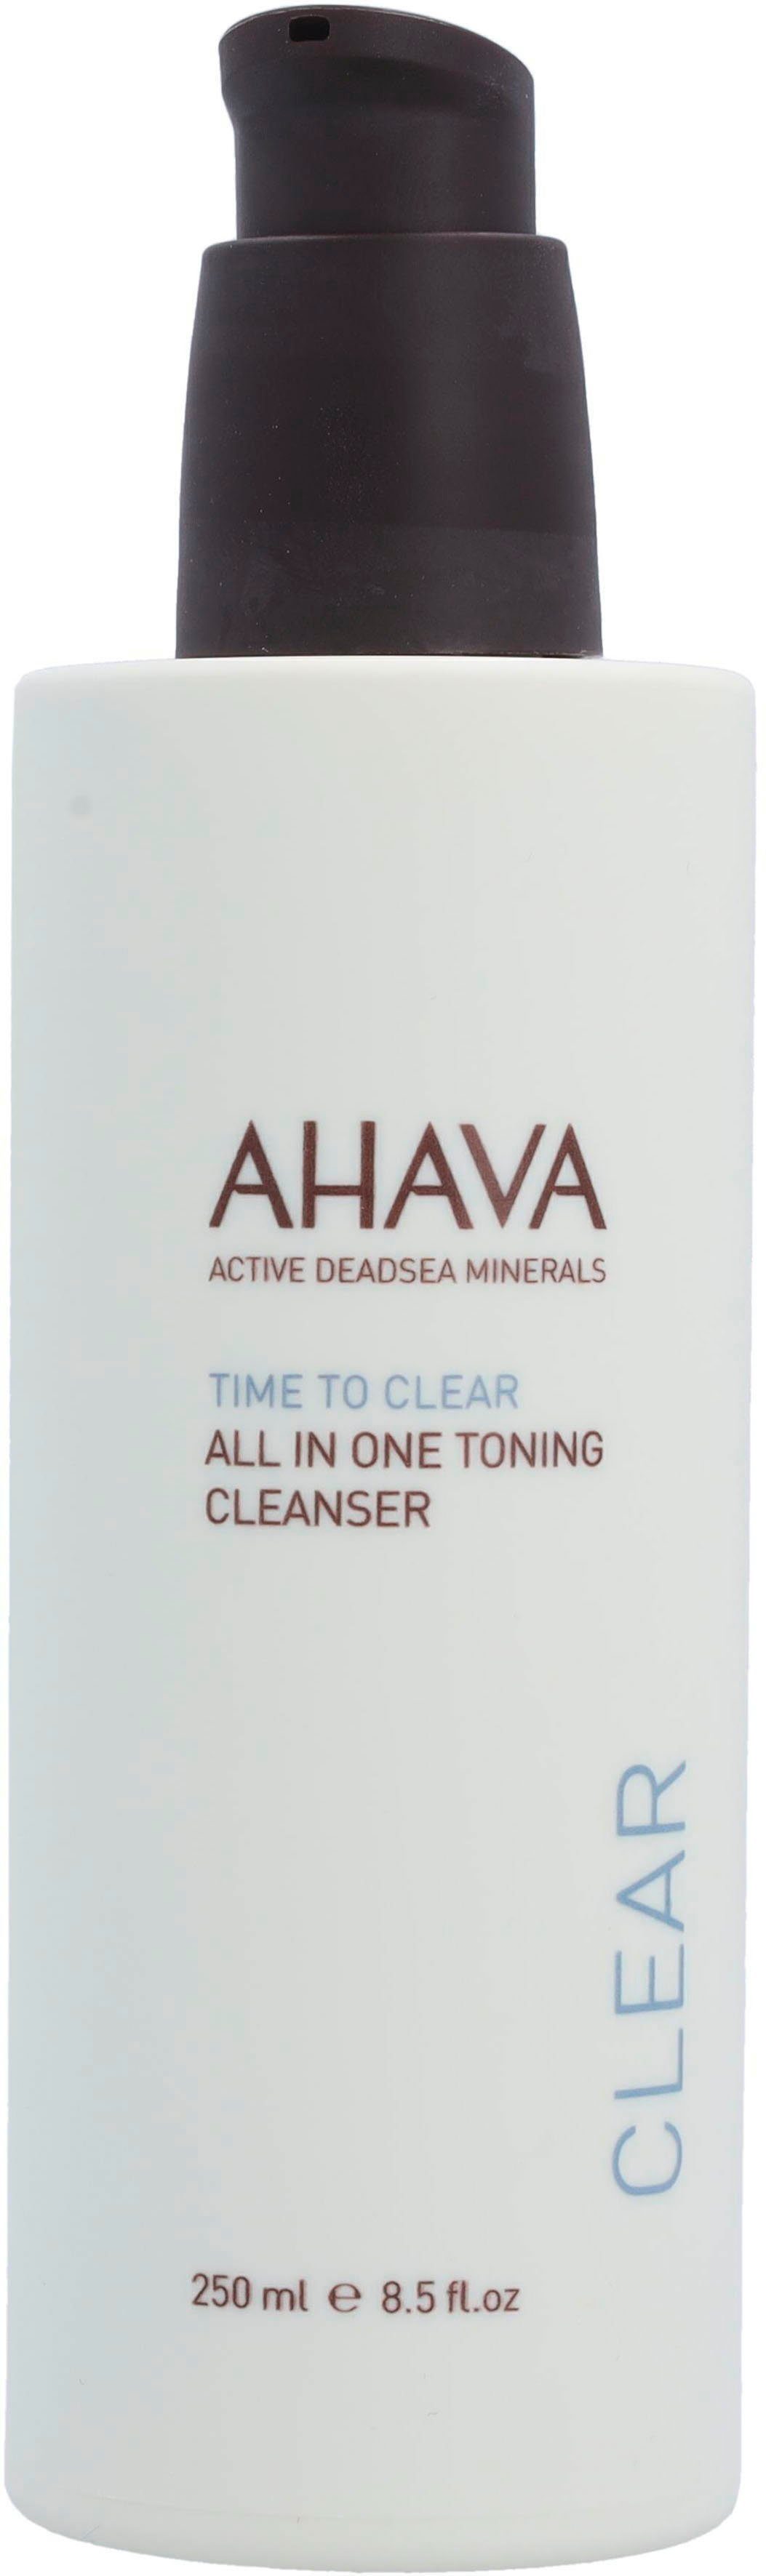 Time In Clear All Gesichts-Reinigungslotion Toning Cleanser To AHAVA One